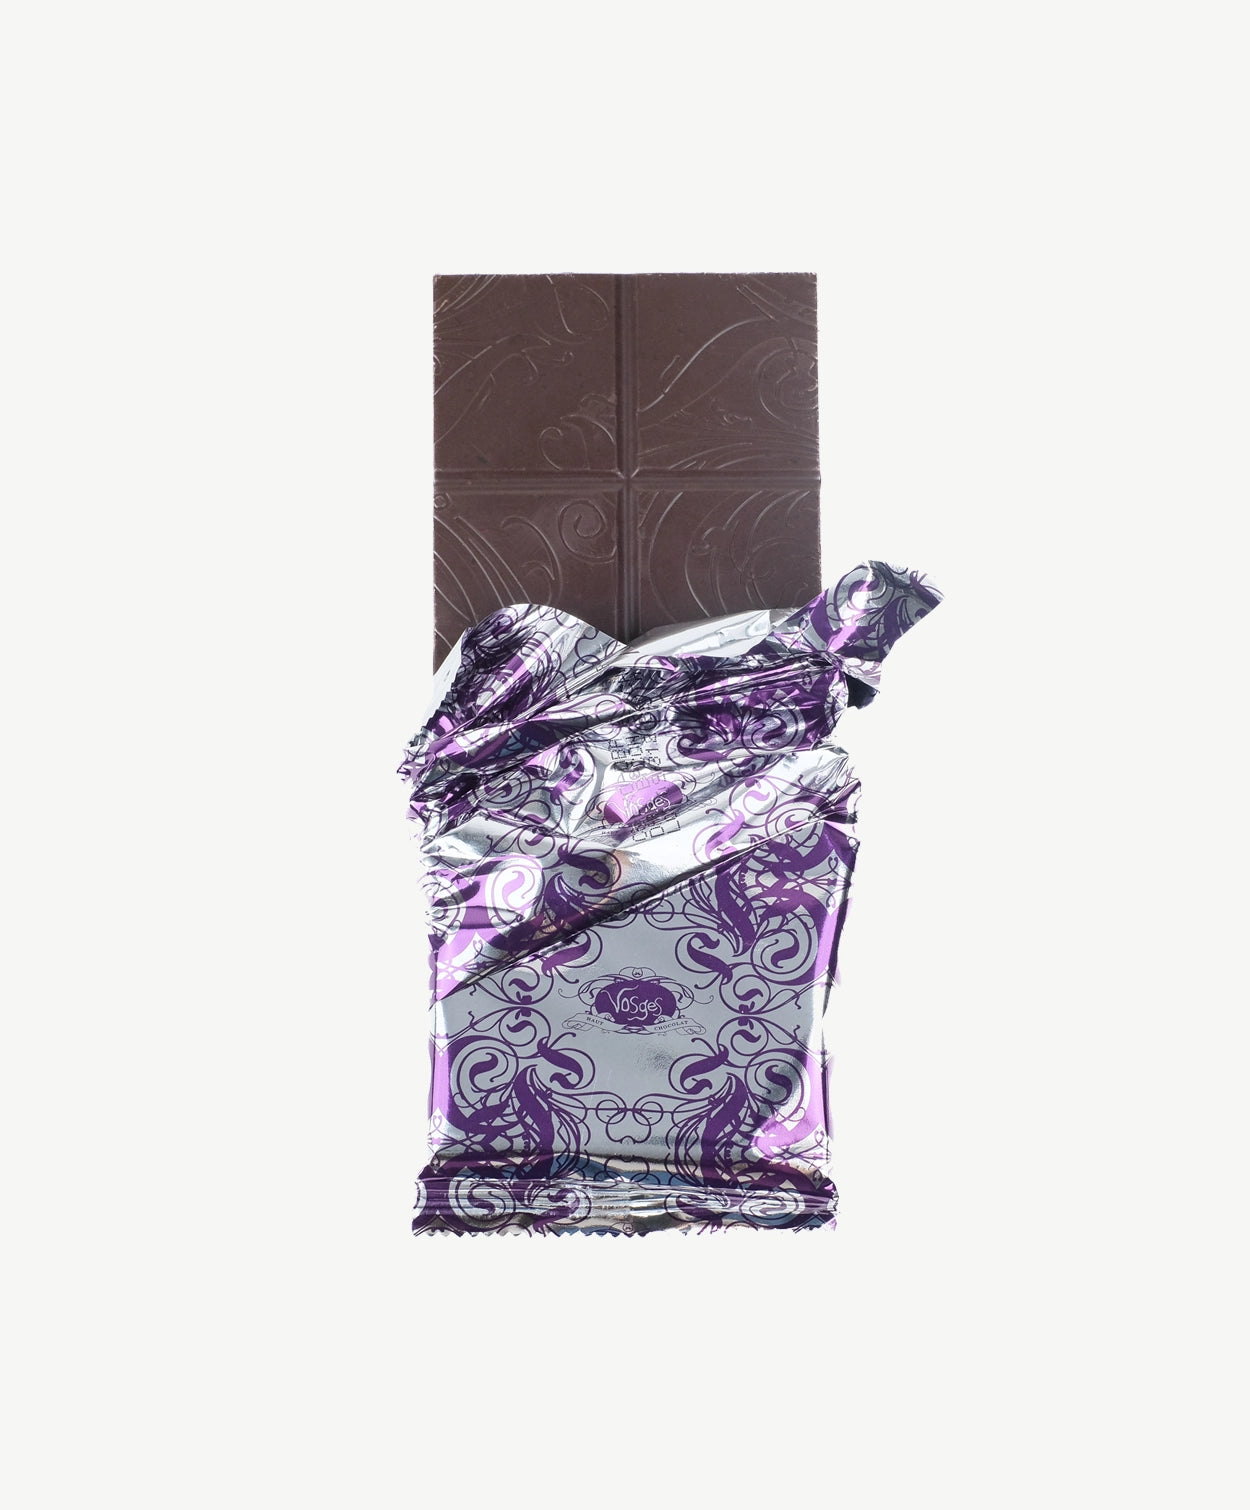 An opened Vosges Manchego and Cherry Chocolate bar in a silver wrapper stands upright on a white background.